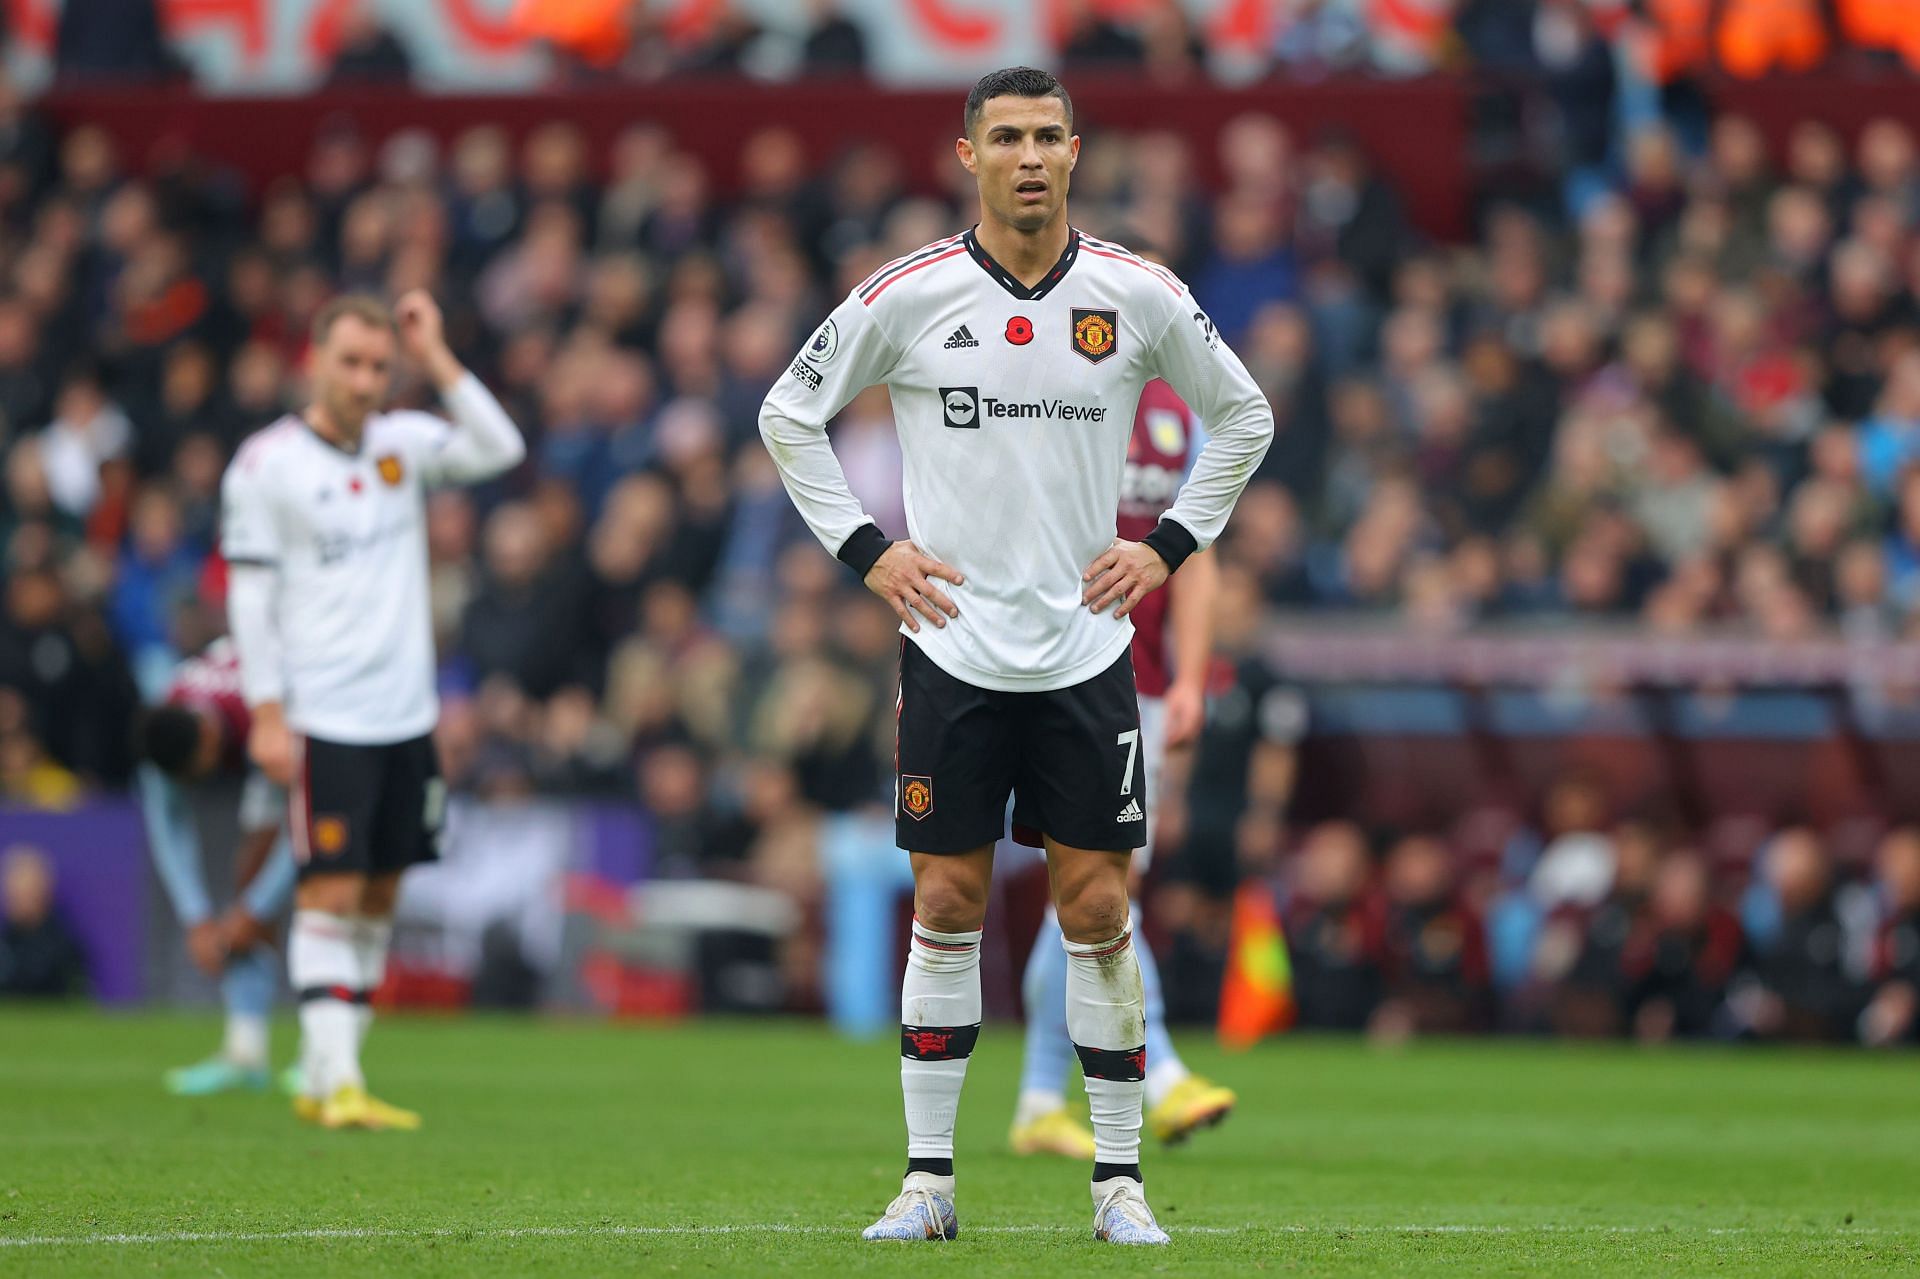 Cristiano Ronaldo has endured a difficult time at Old Trafford of late.